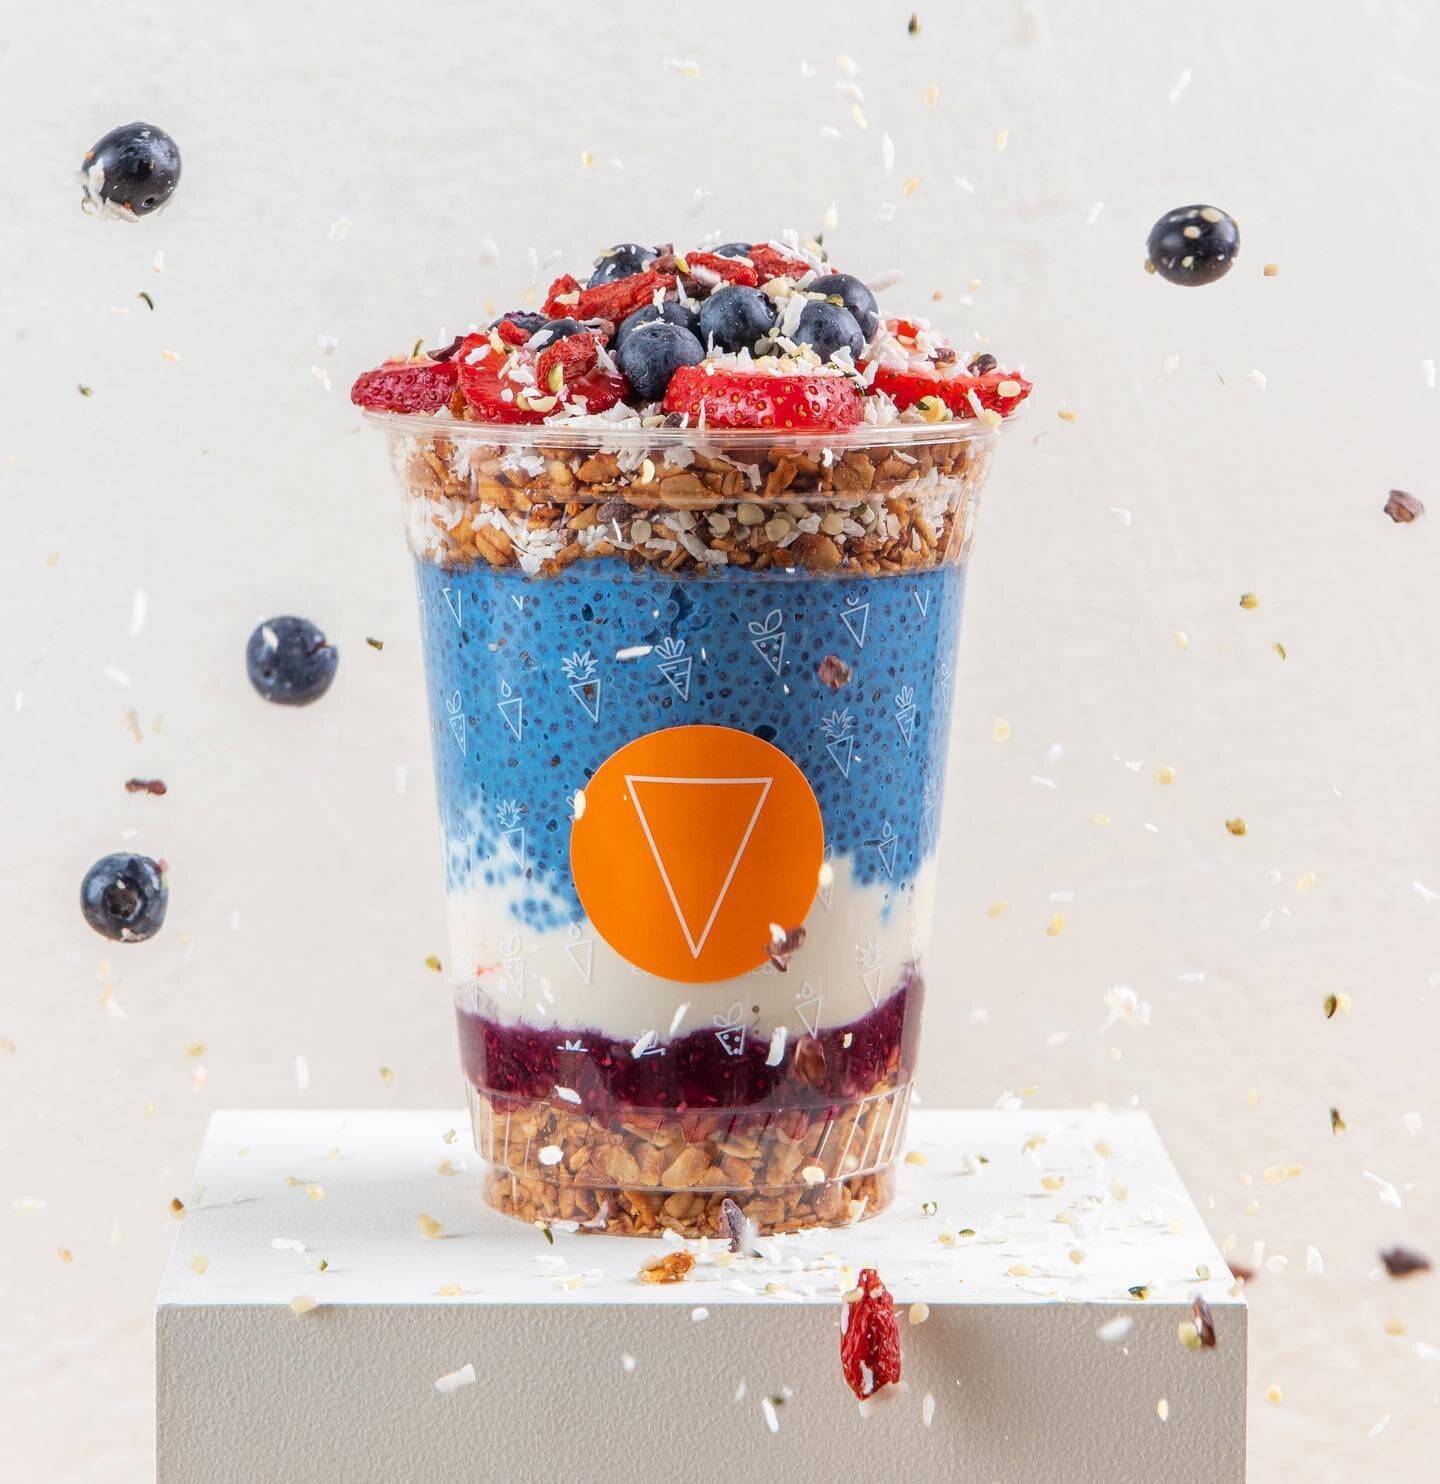 Today&rsquo;s forecast: Sunny with the occasional blueberry shower ☀️
⠀⠀⠀⠀⠀⠀⠀⠀⠀
These chia parfaits are available in our grab and go fridge everyday and make the perfect breakfast on the move or late night treat. As always, 100% organic, gluten-free 